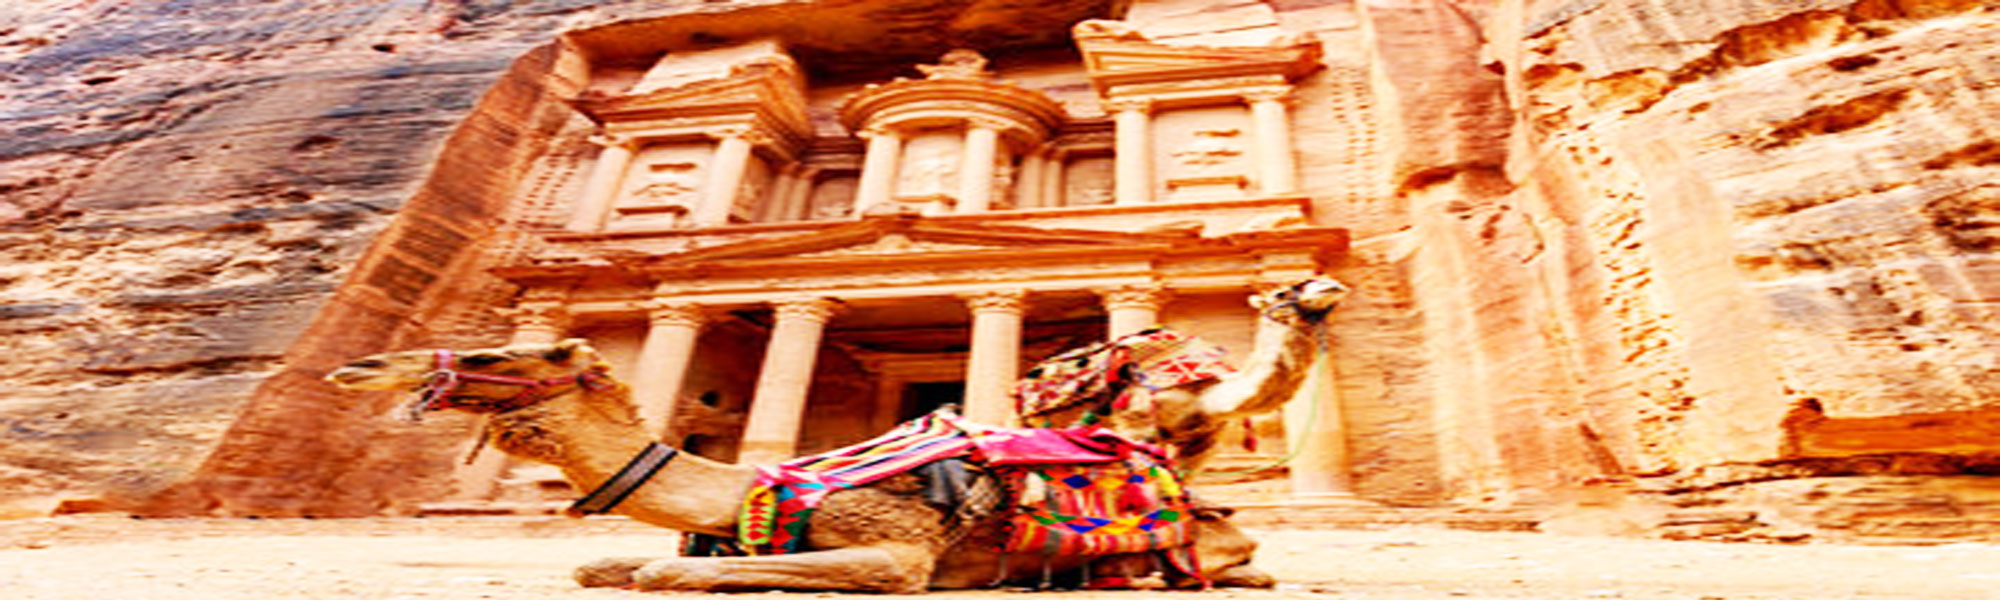 Heritage Haveli Tours in India with Camel Safari Tours in India